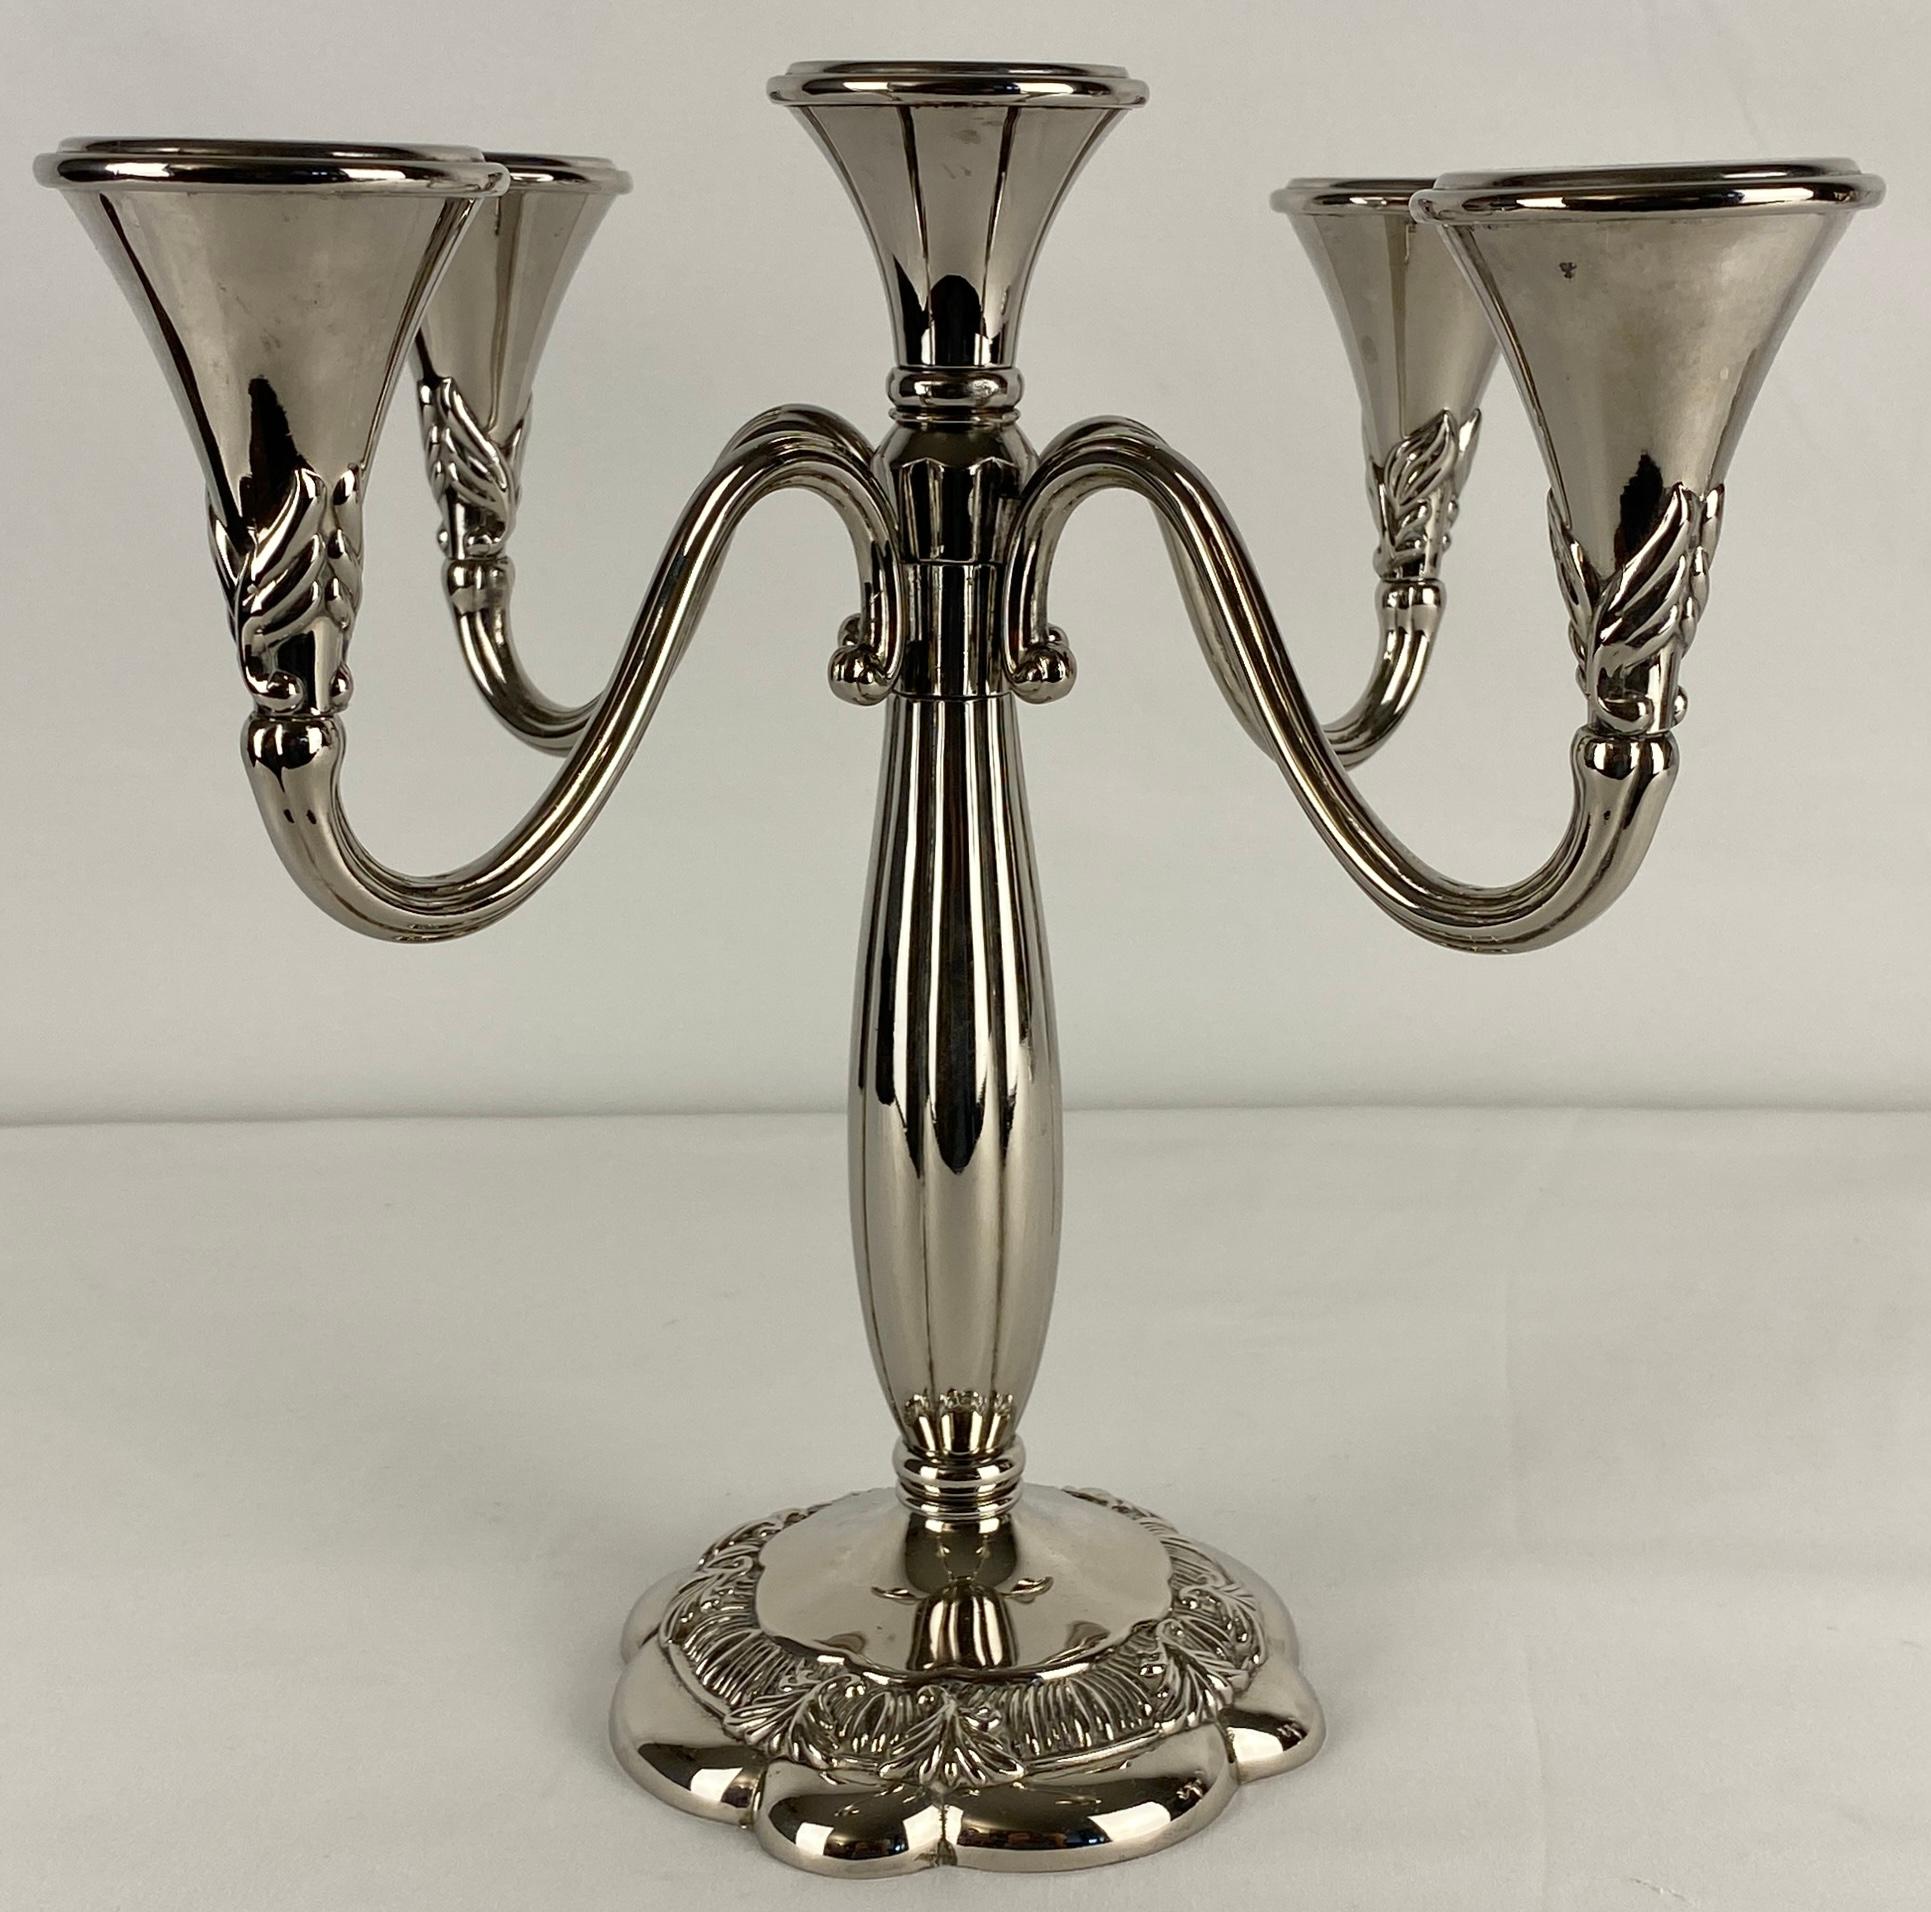 Pair of Art Deco Style Silver Plated Candelabras by Royal Gallery For Sale 2